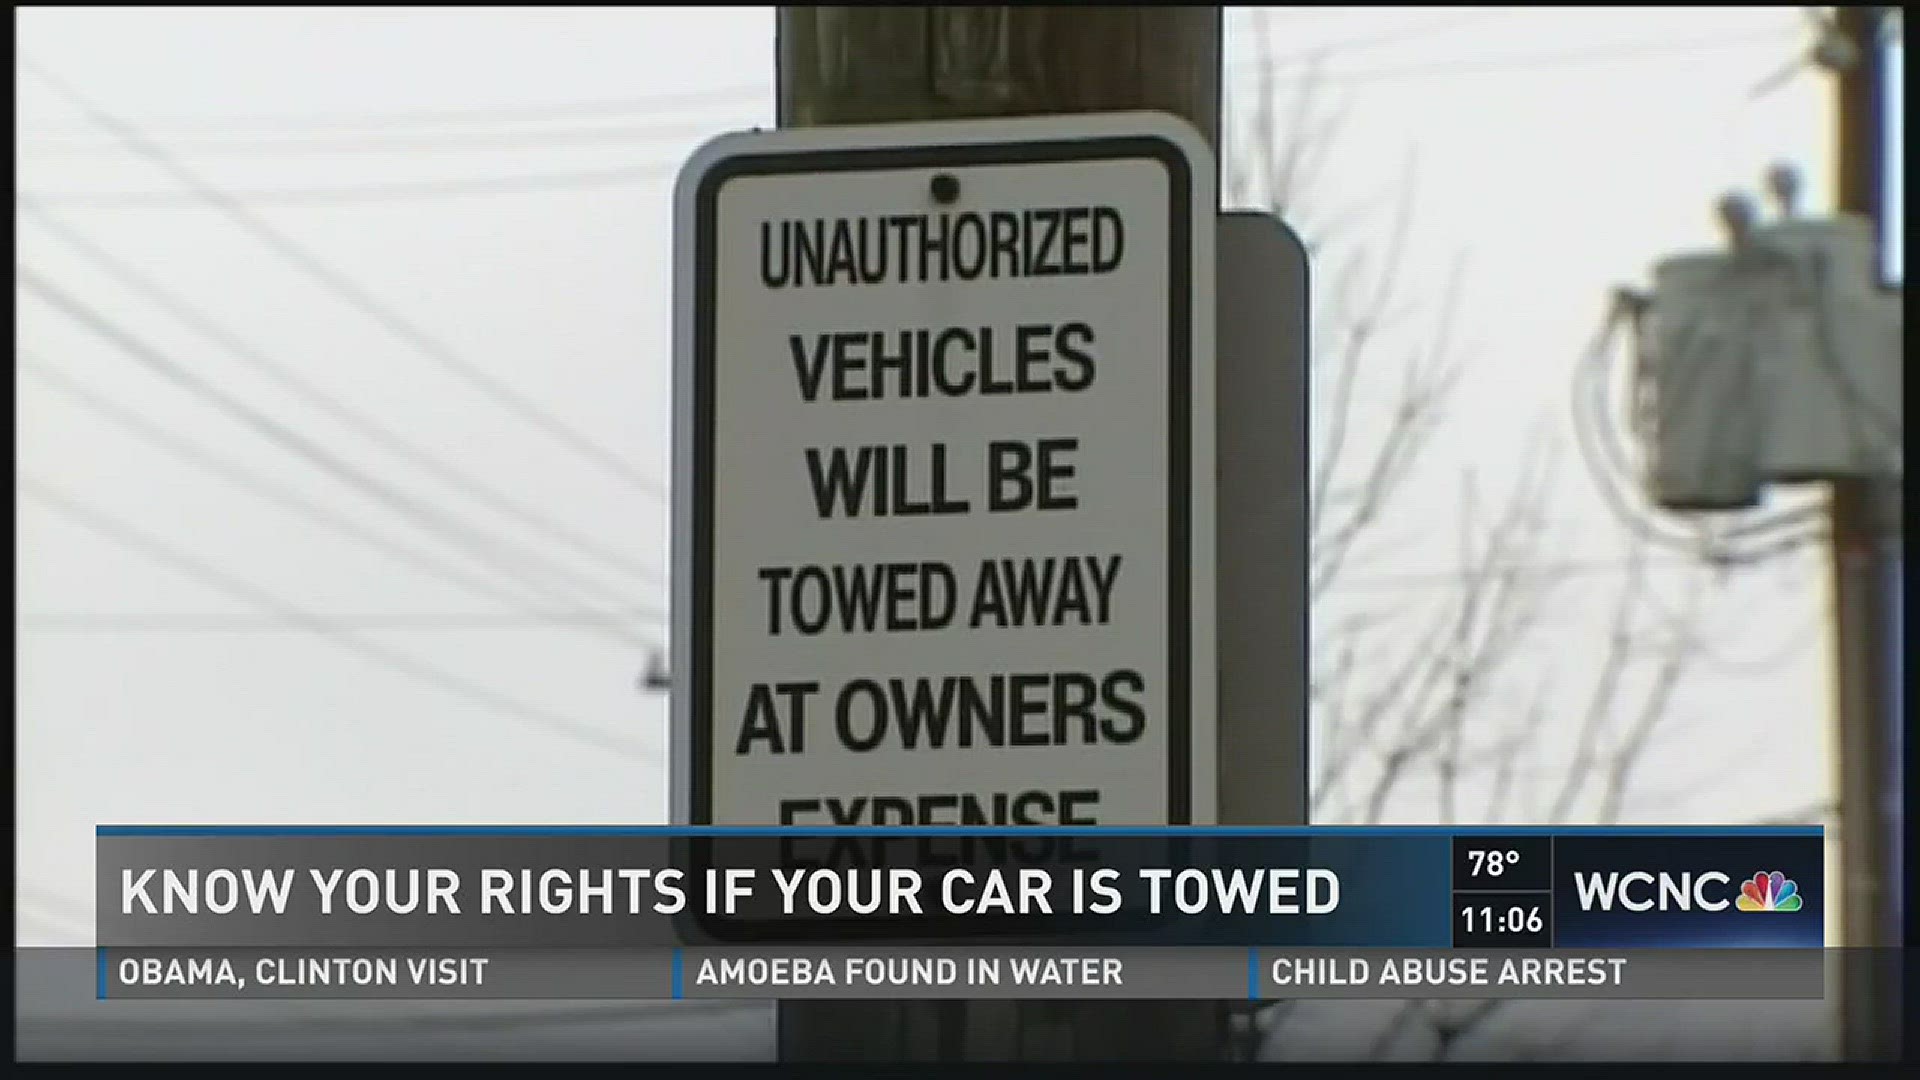 What happens if your car is towed? Do you know your rights?